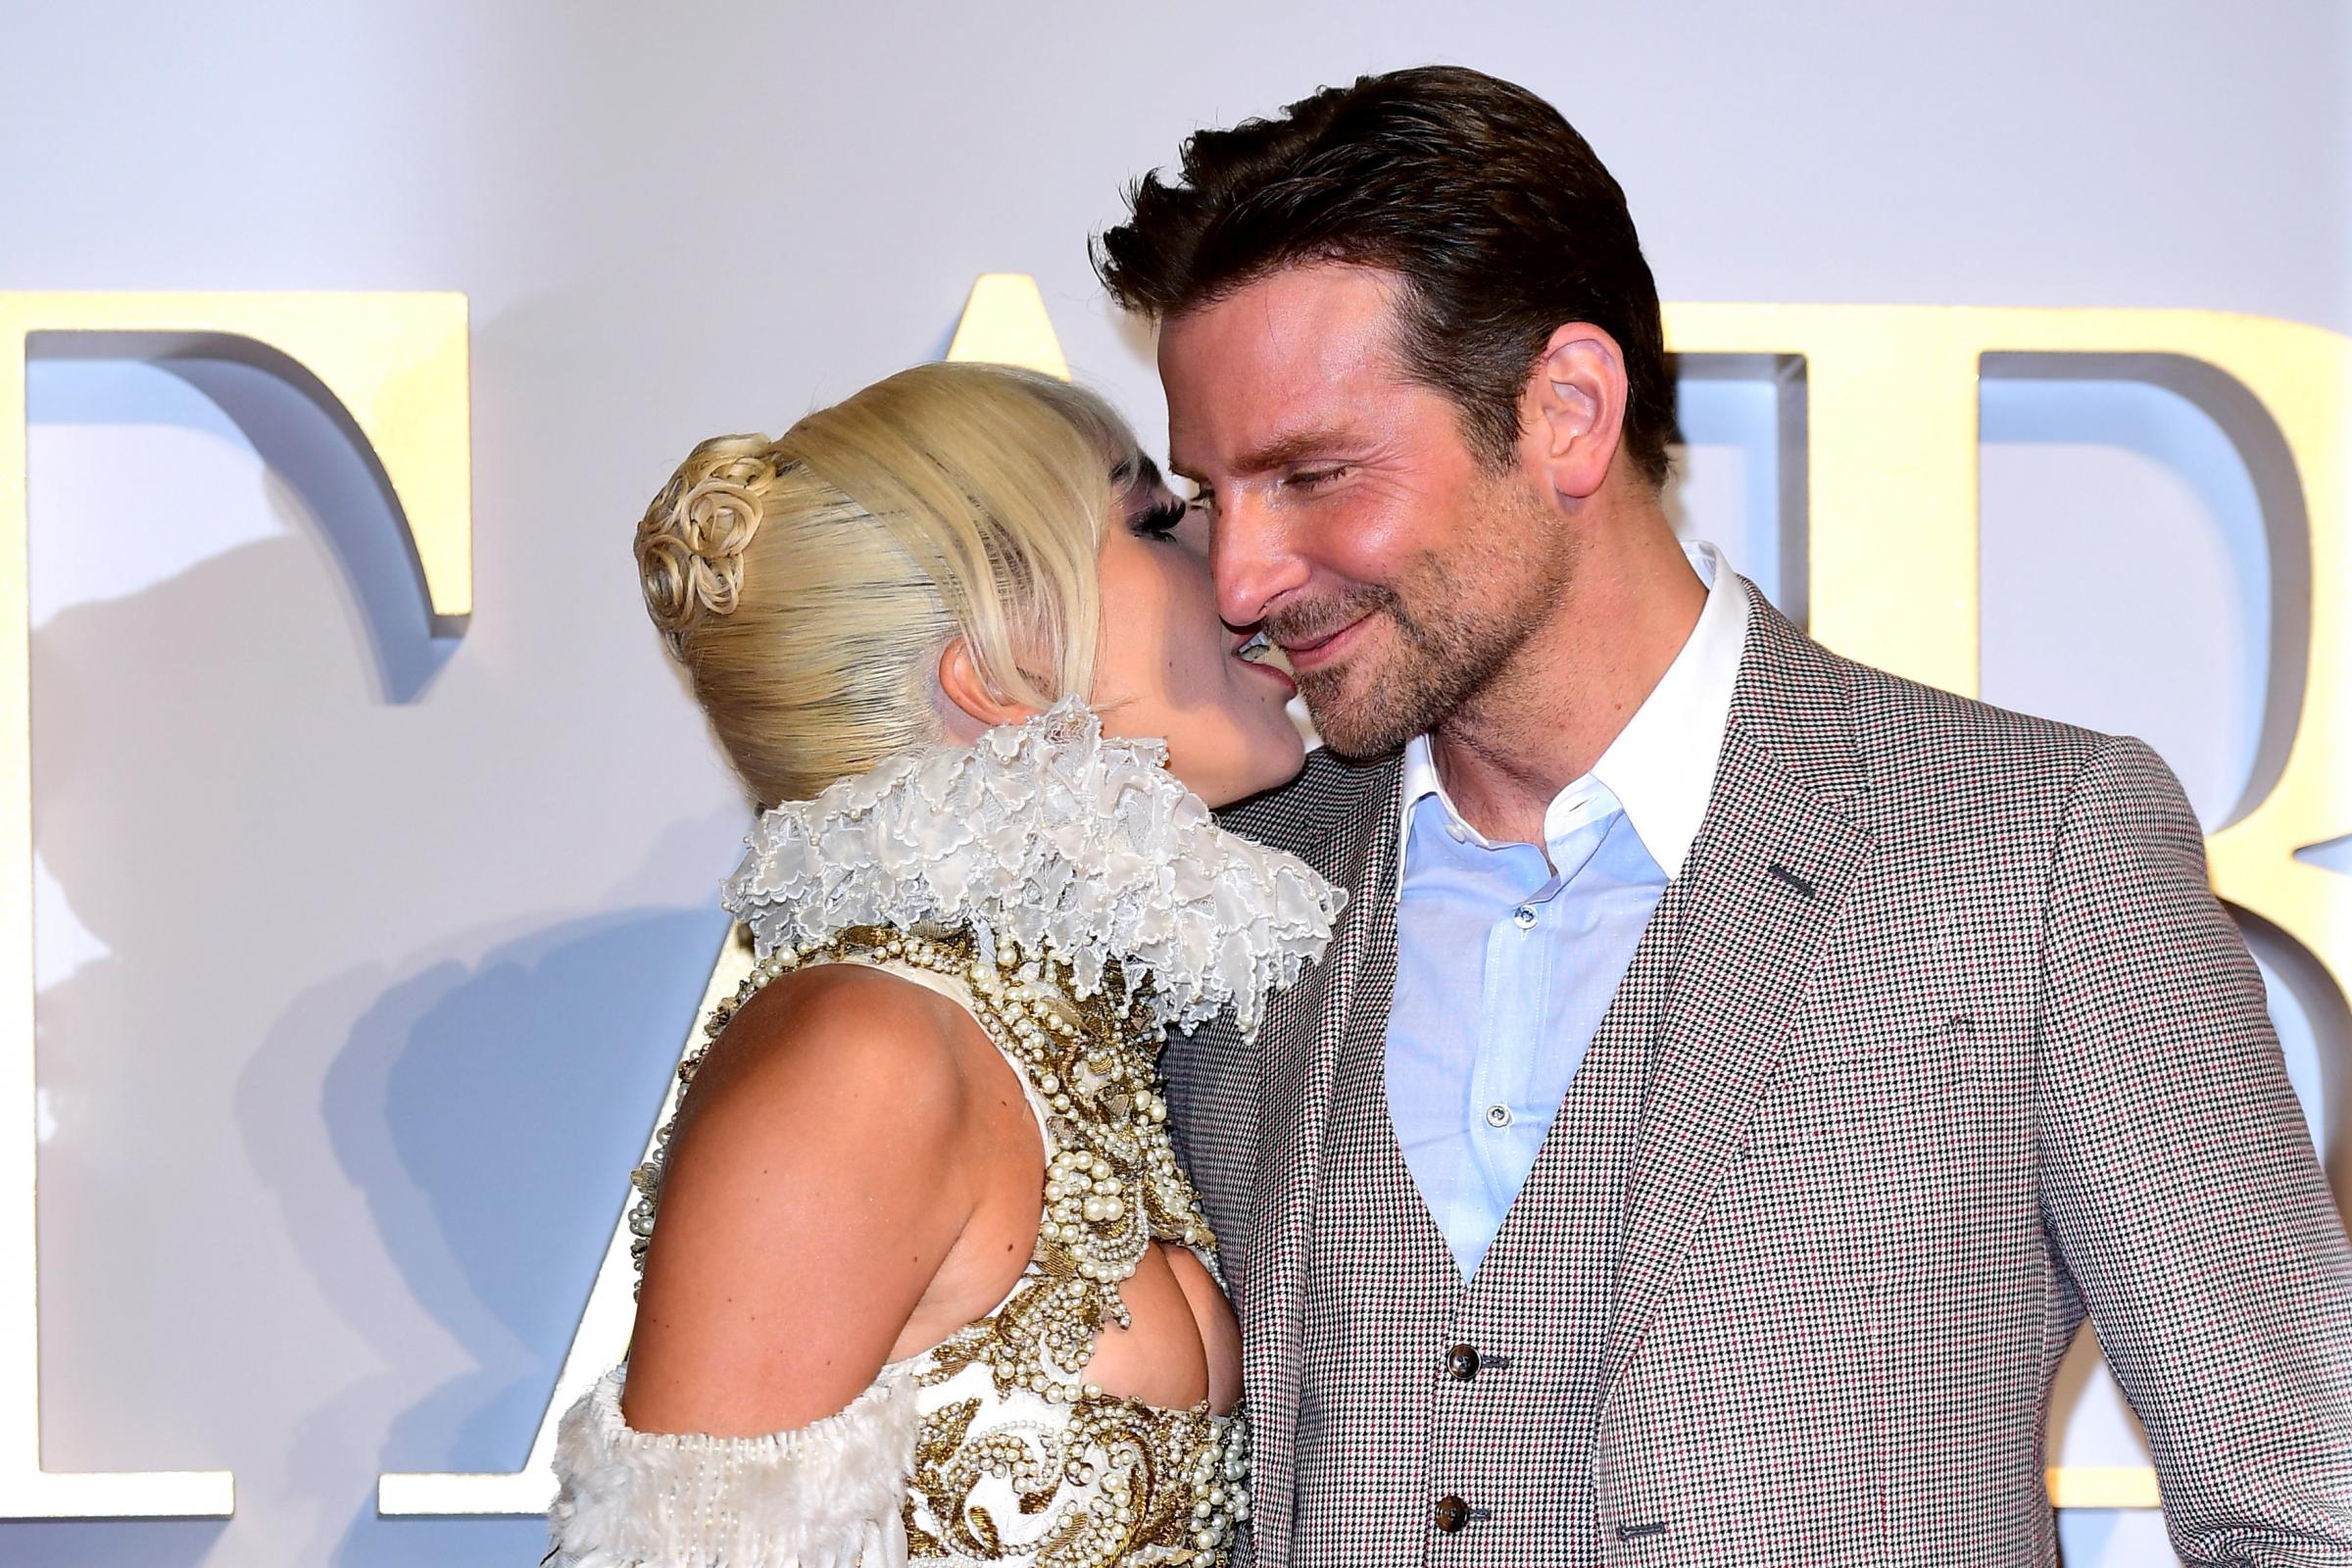 Golden Globes: A Star Is Born’s Lady Gaga and Bradley Cooper nominated